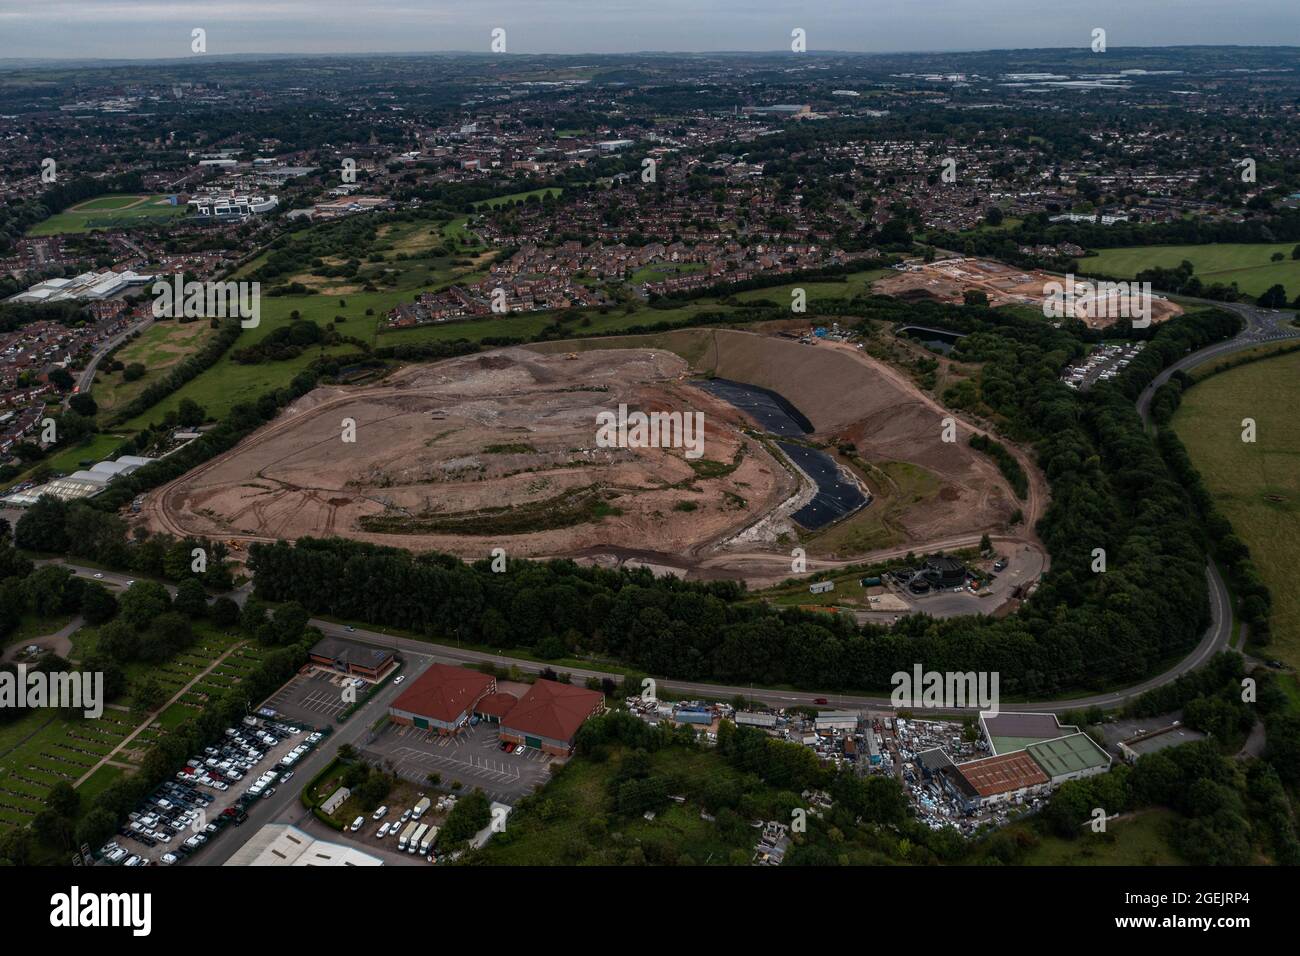 Stop the Stink, Walley’s Quarry Landfill Silverdale Newcastle Stoke on Trent Aerial Birds Eye Visualizza le immagini ideali per i News Reports Foto Stock